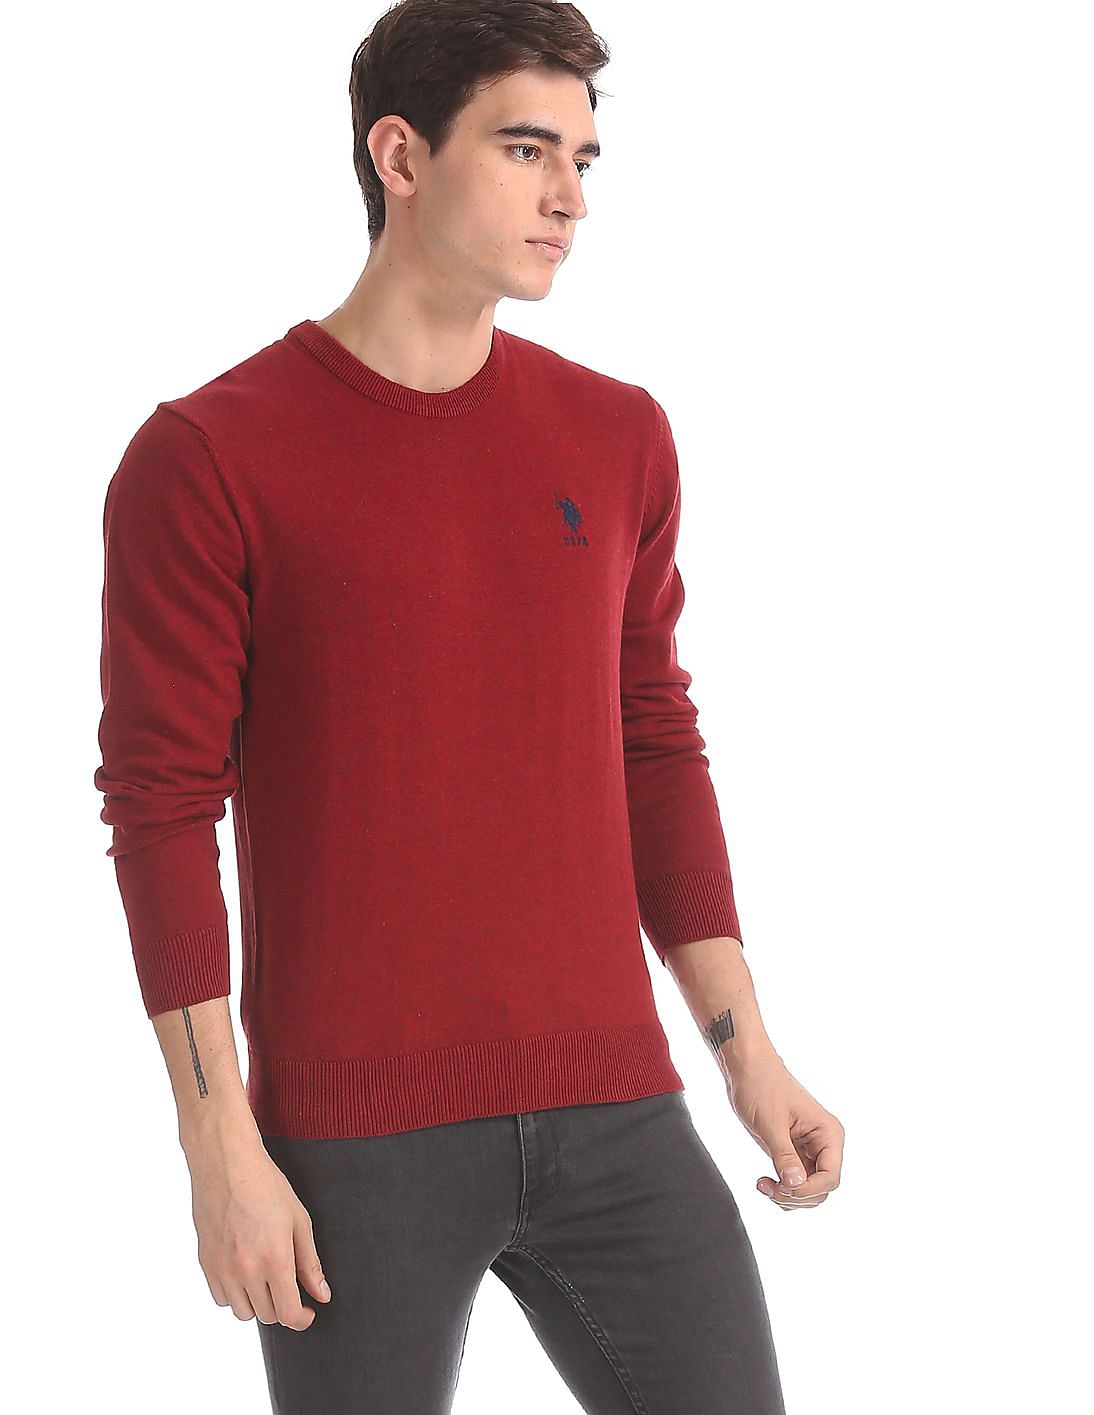 Buy Men Red Crew Neck Solid Sweater online at NNNOW.com